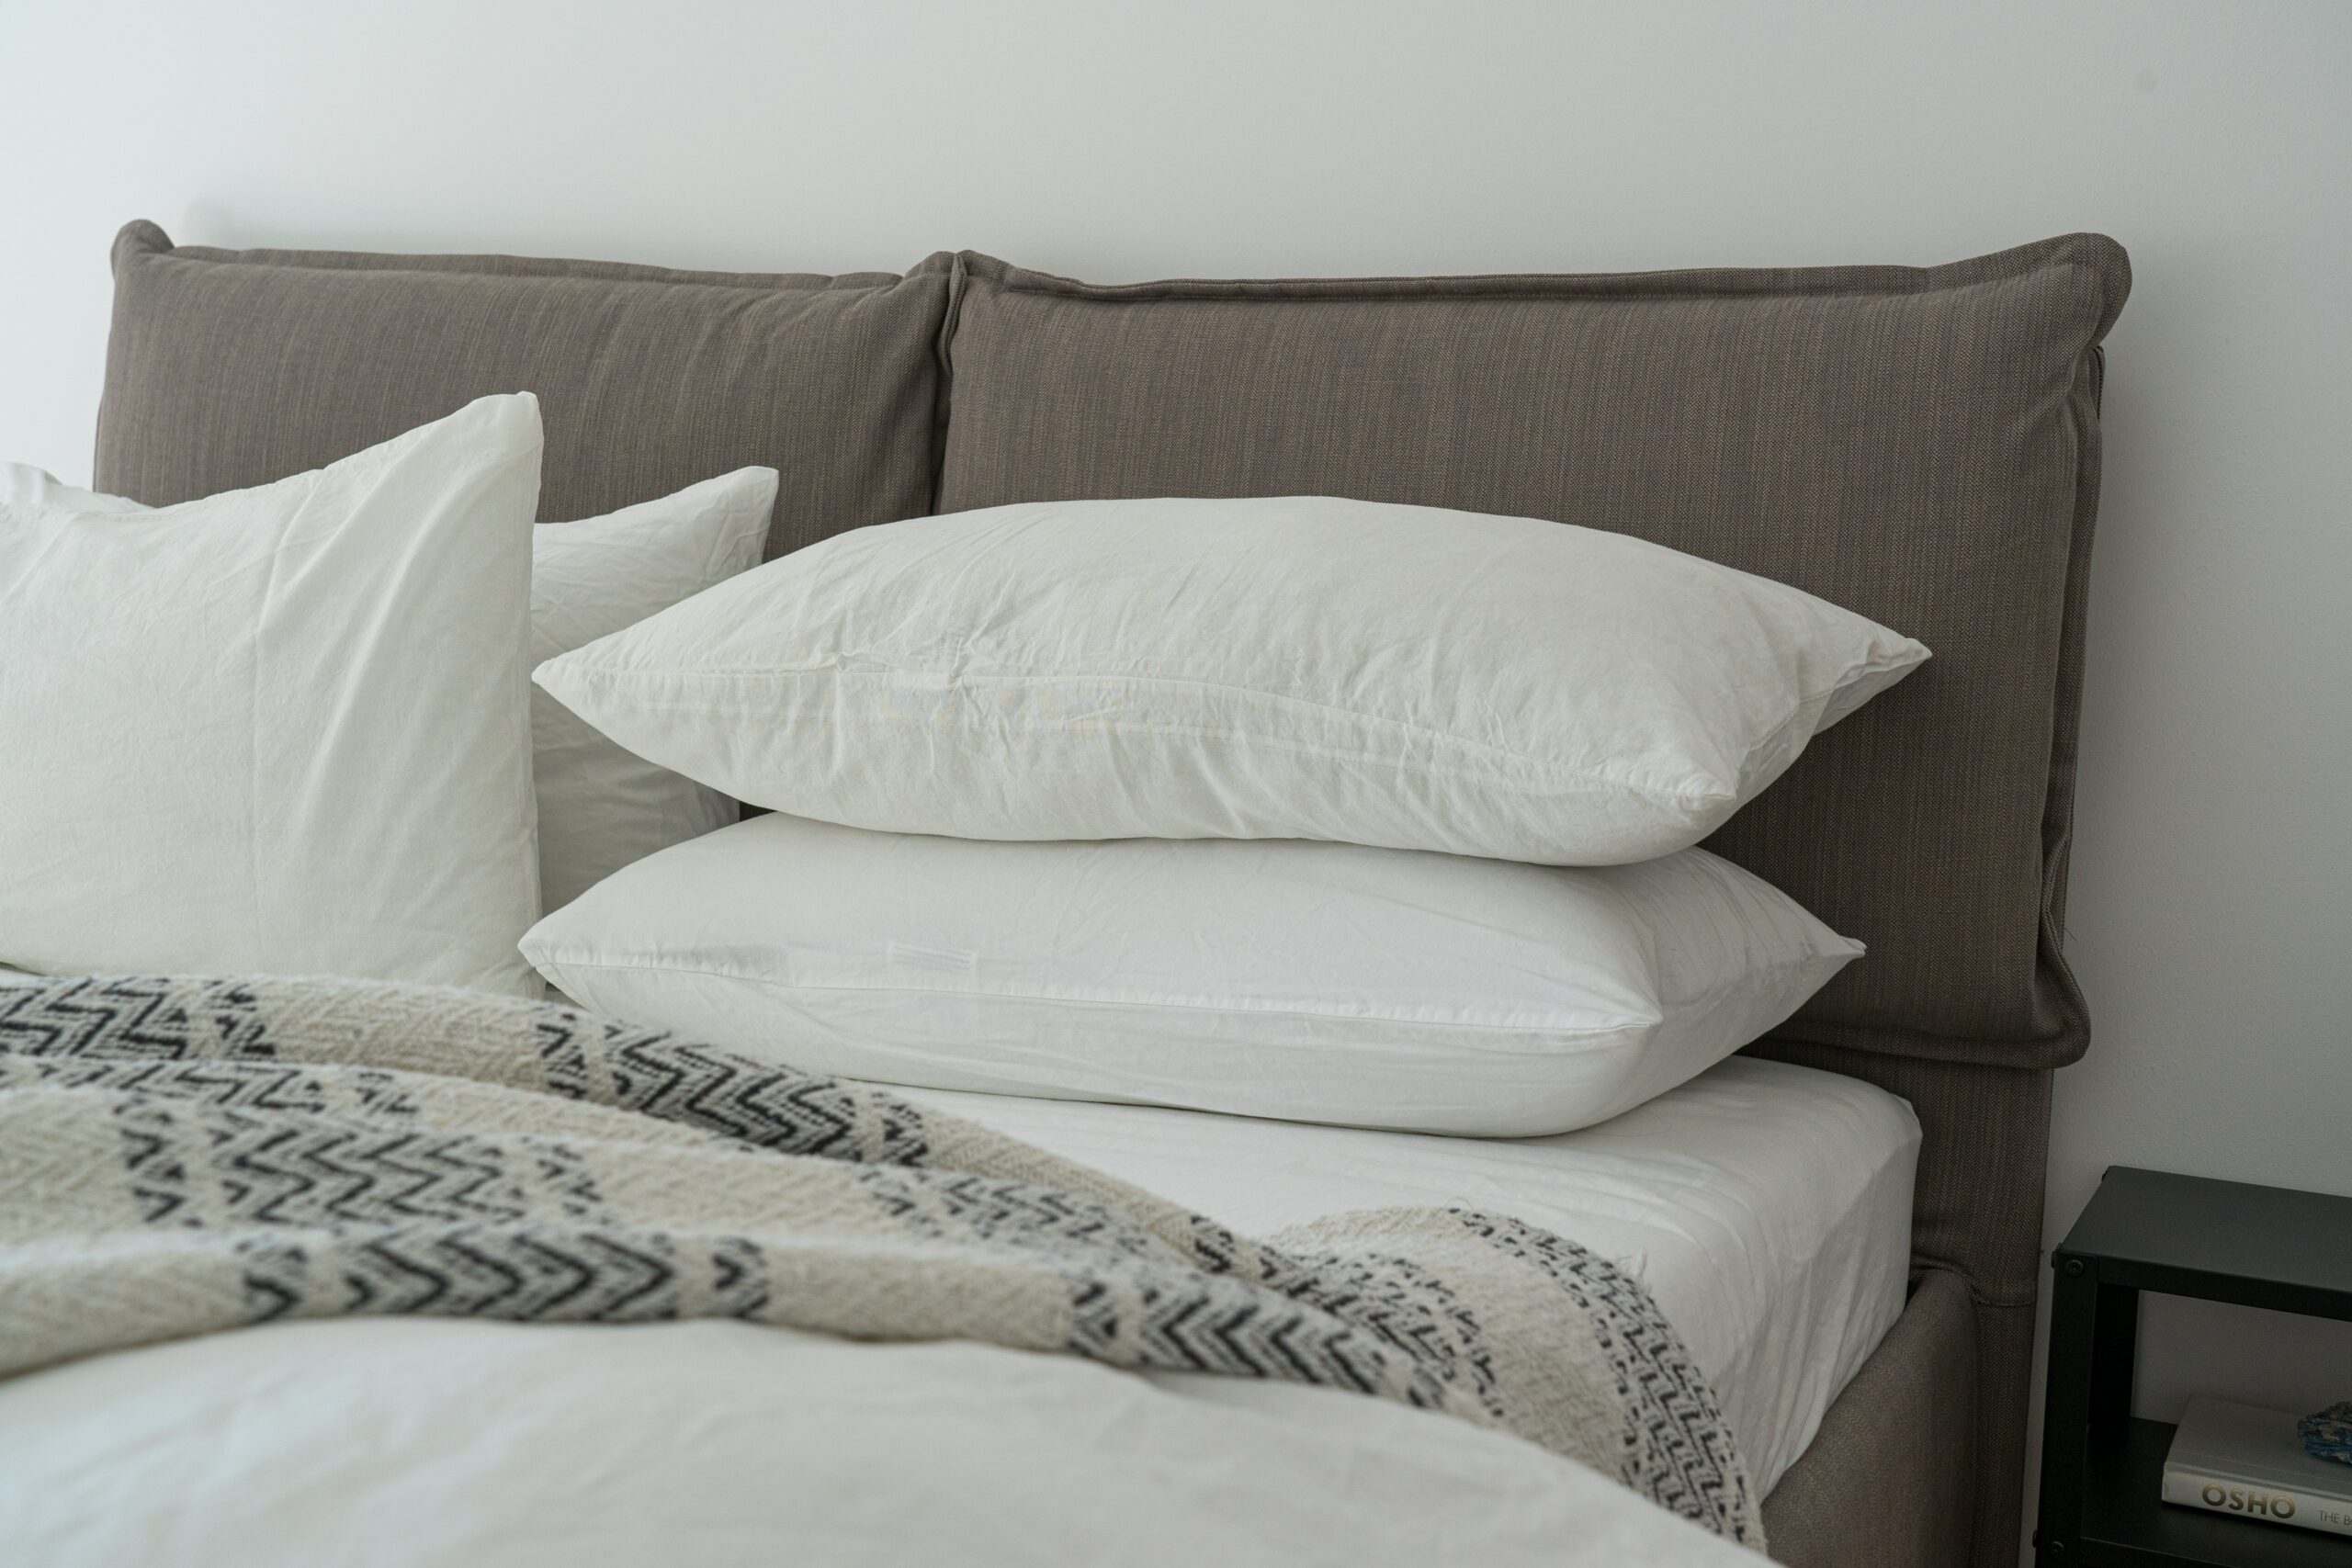 How Do You Get the Smell Out of Feather Pillows?